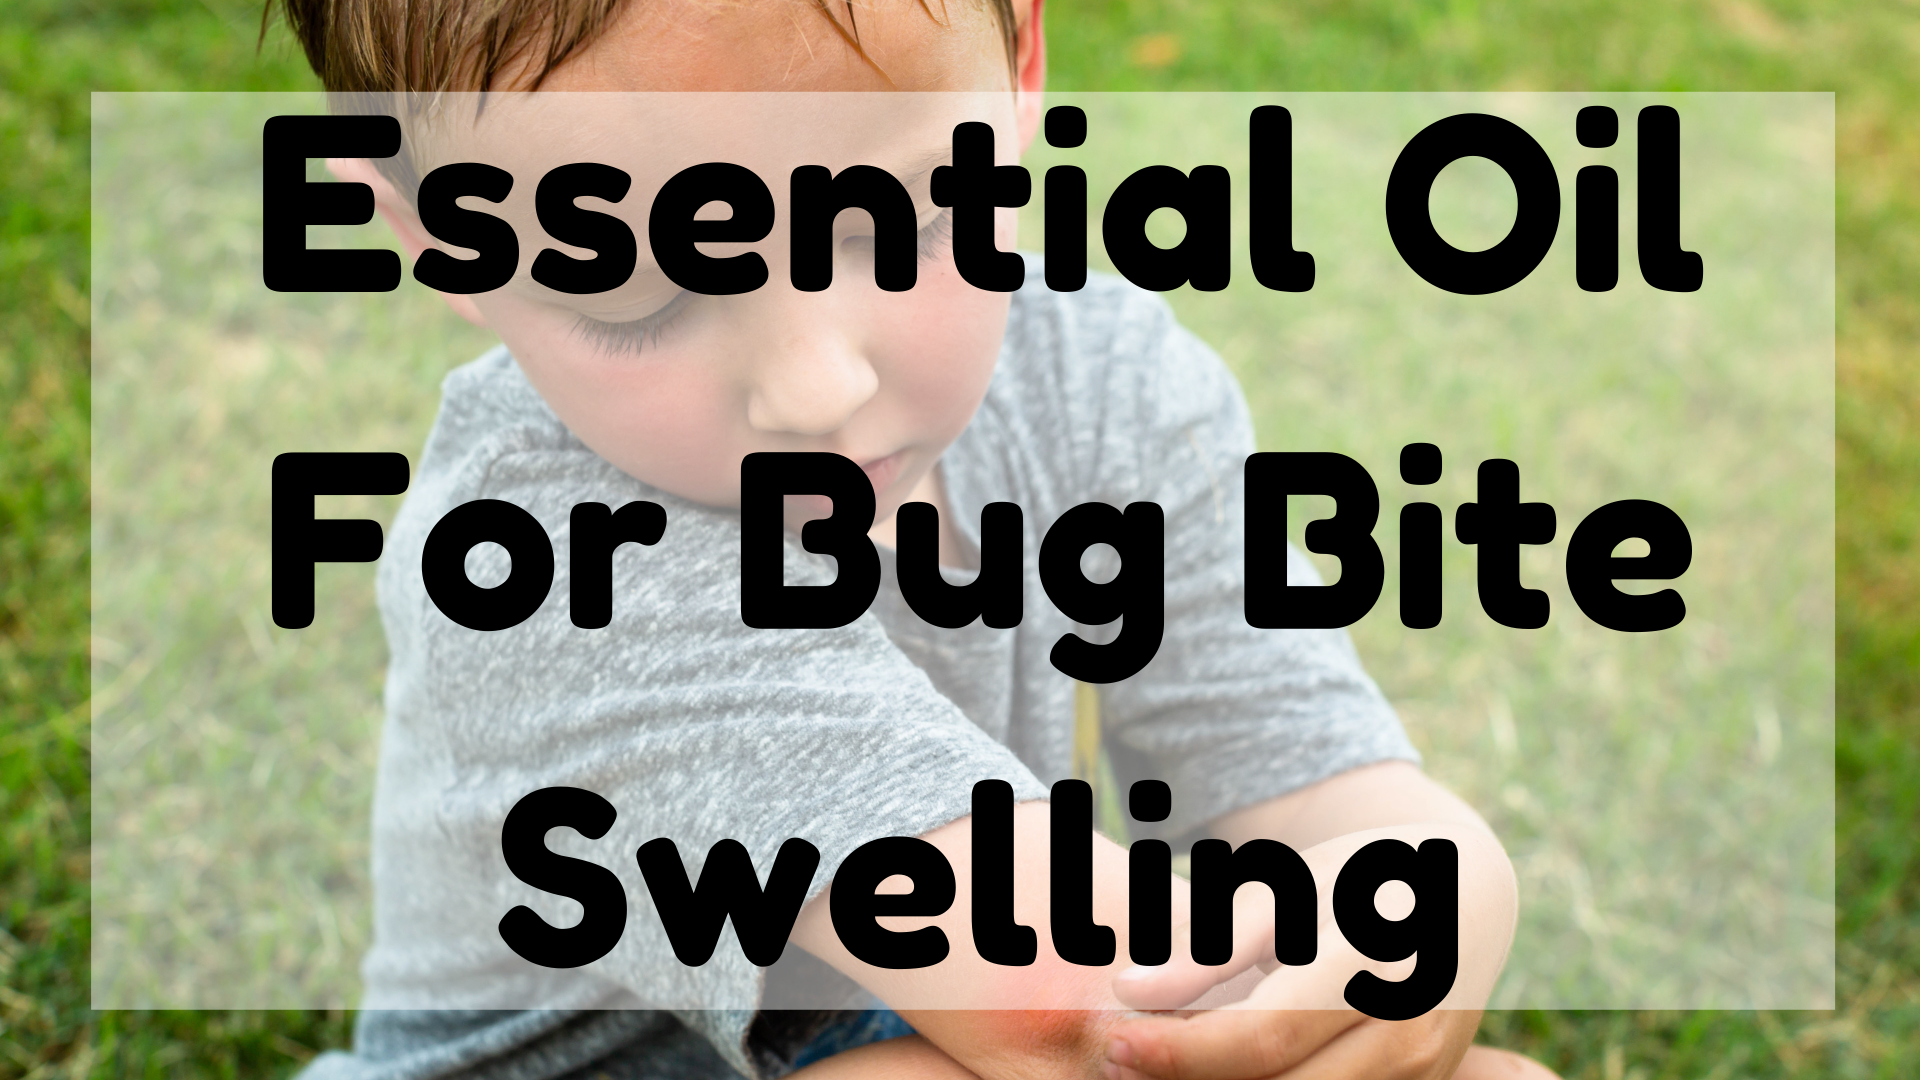 Essential Oil For Bug Bite Swelling